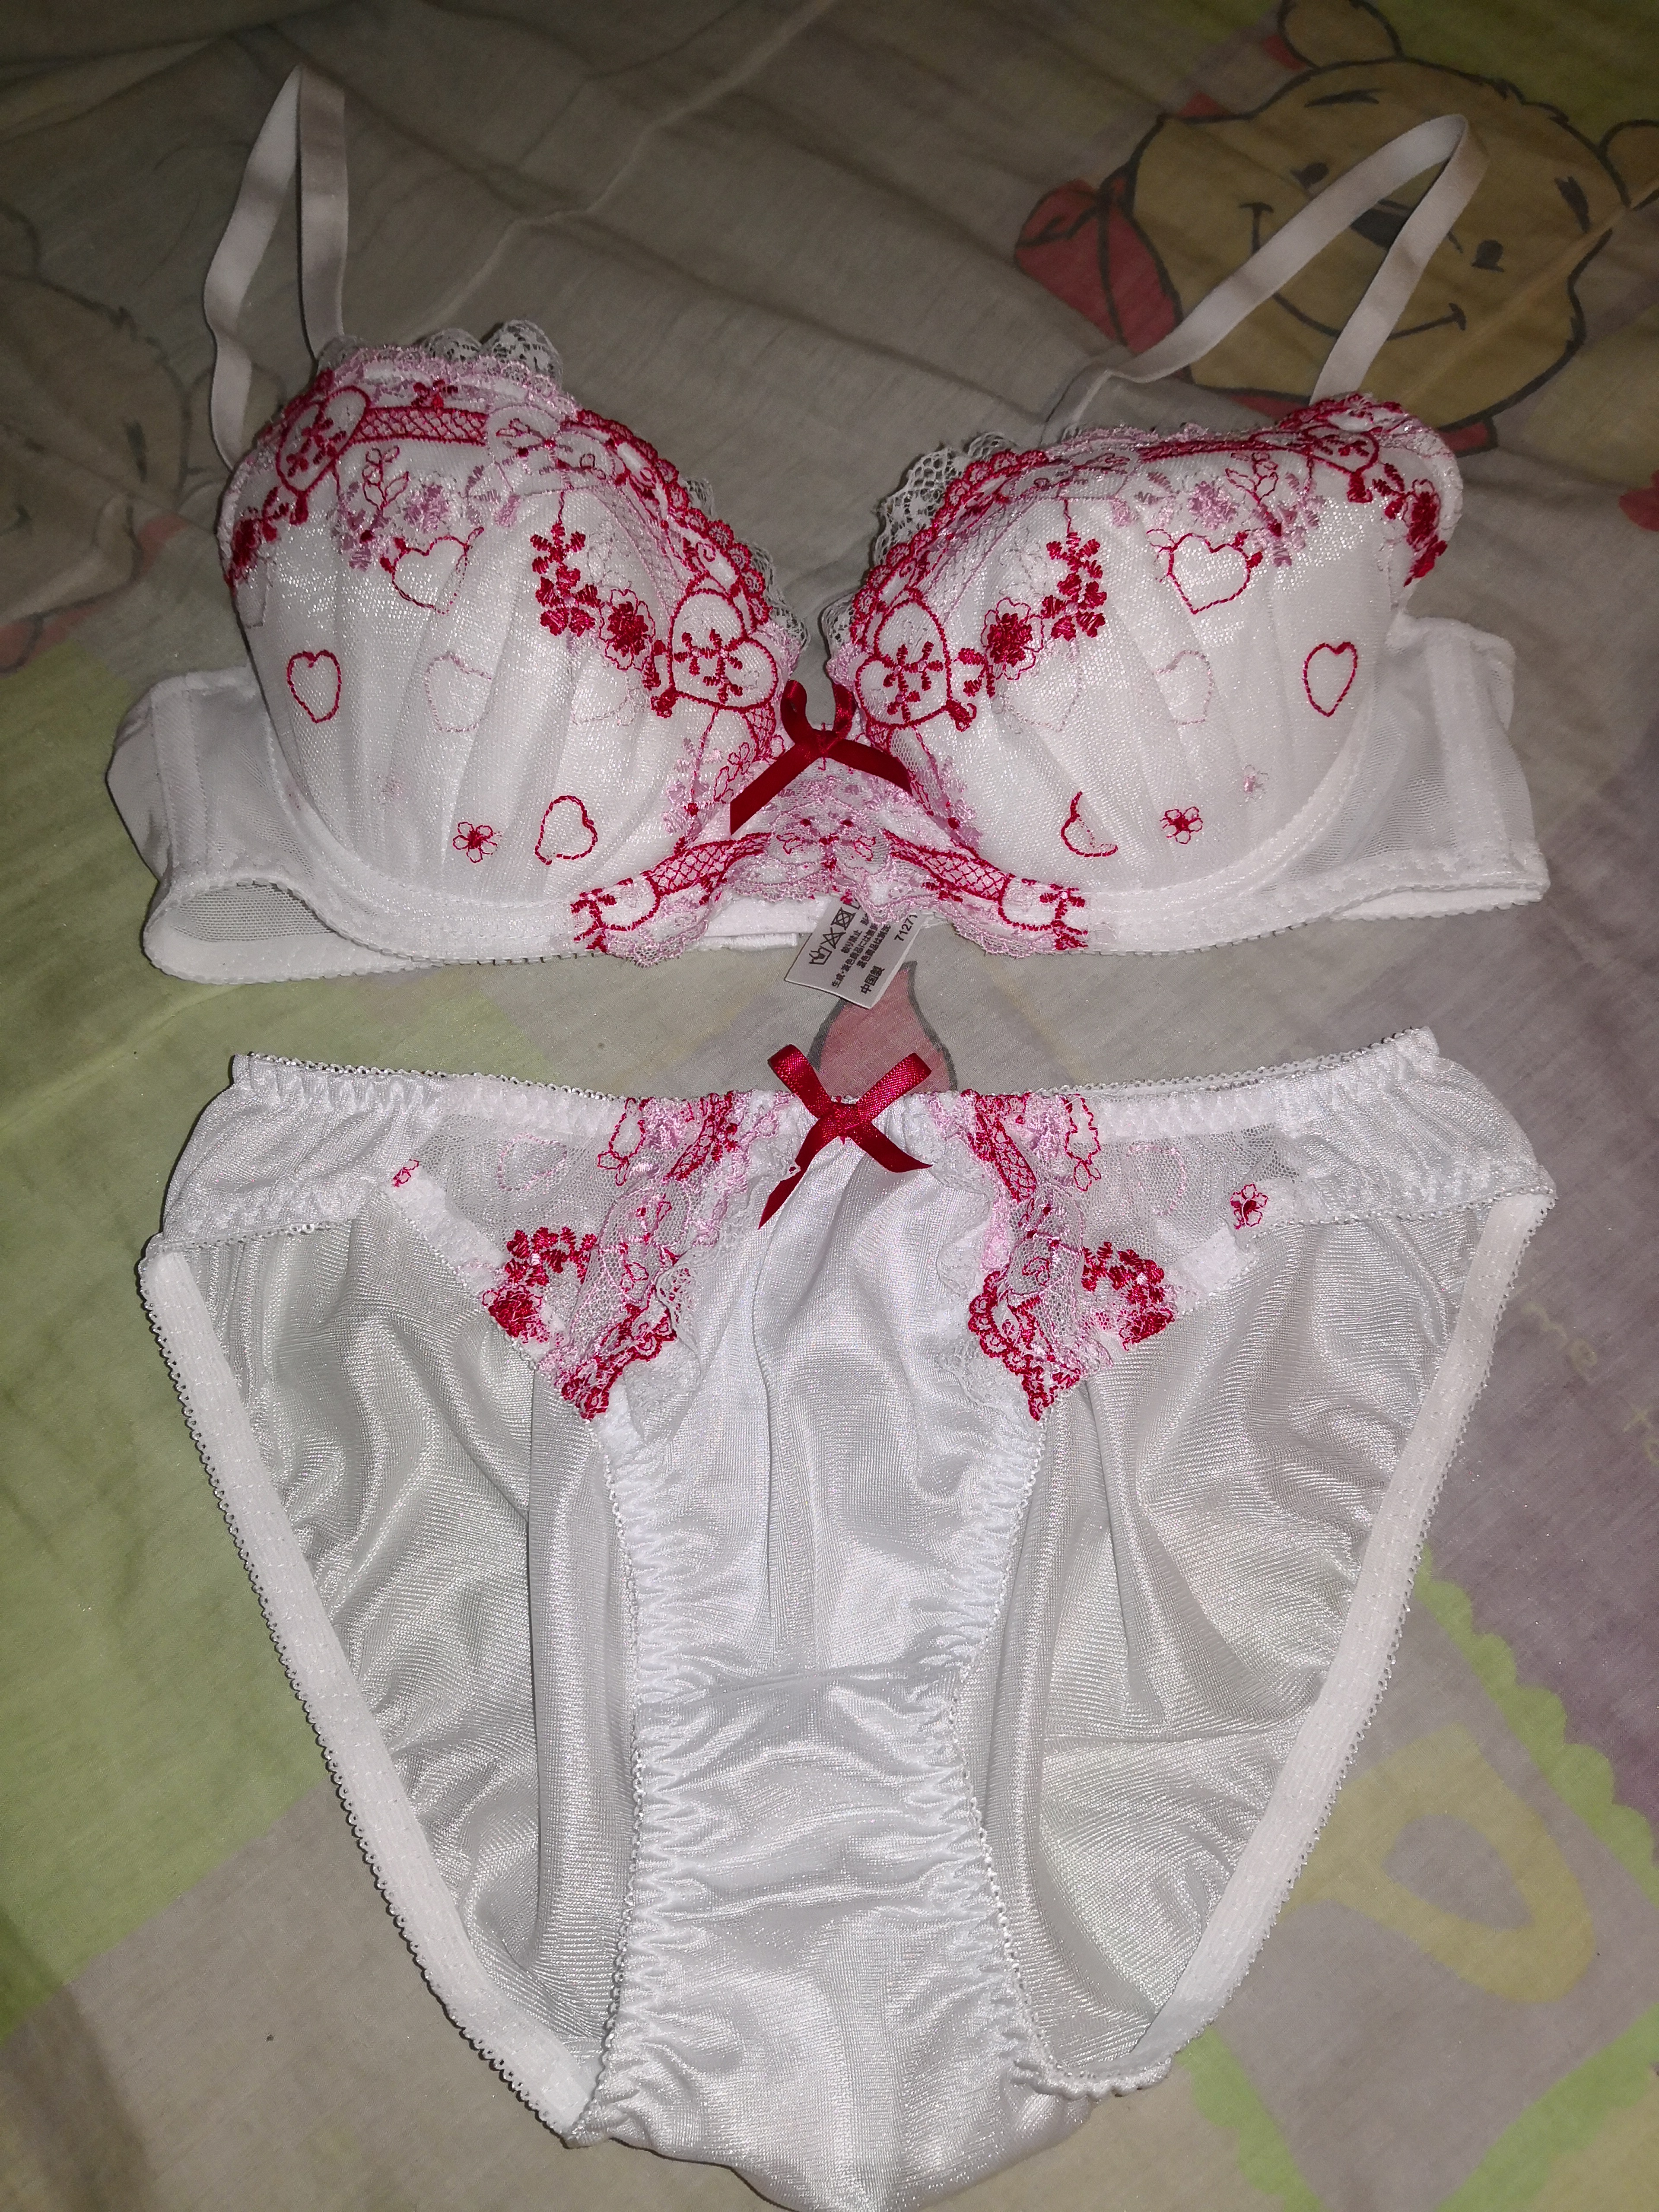 A LOVELY JAPAN WHITE FLOWER EMBROIDERY PANTY WHEN WAS NEW AND CLEANING.